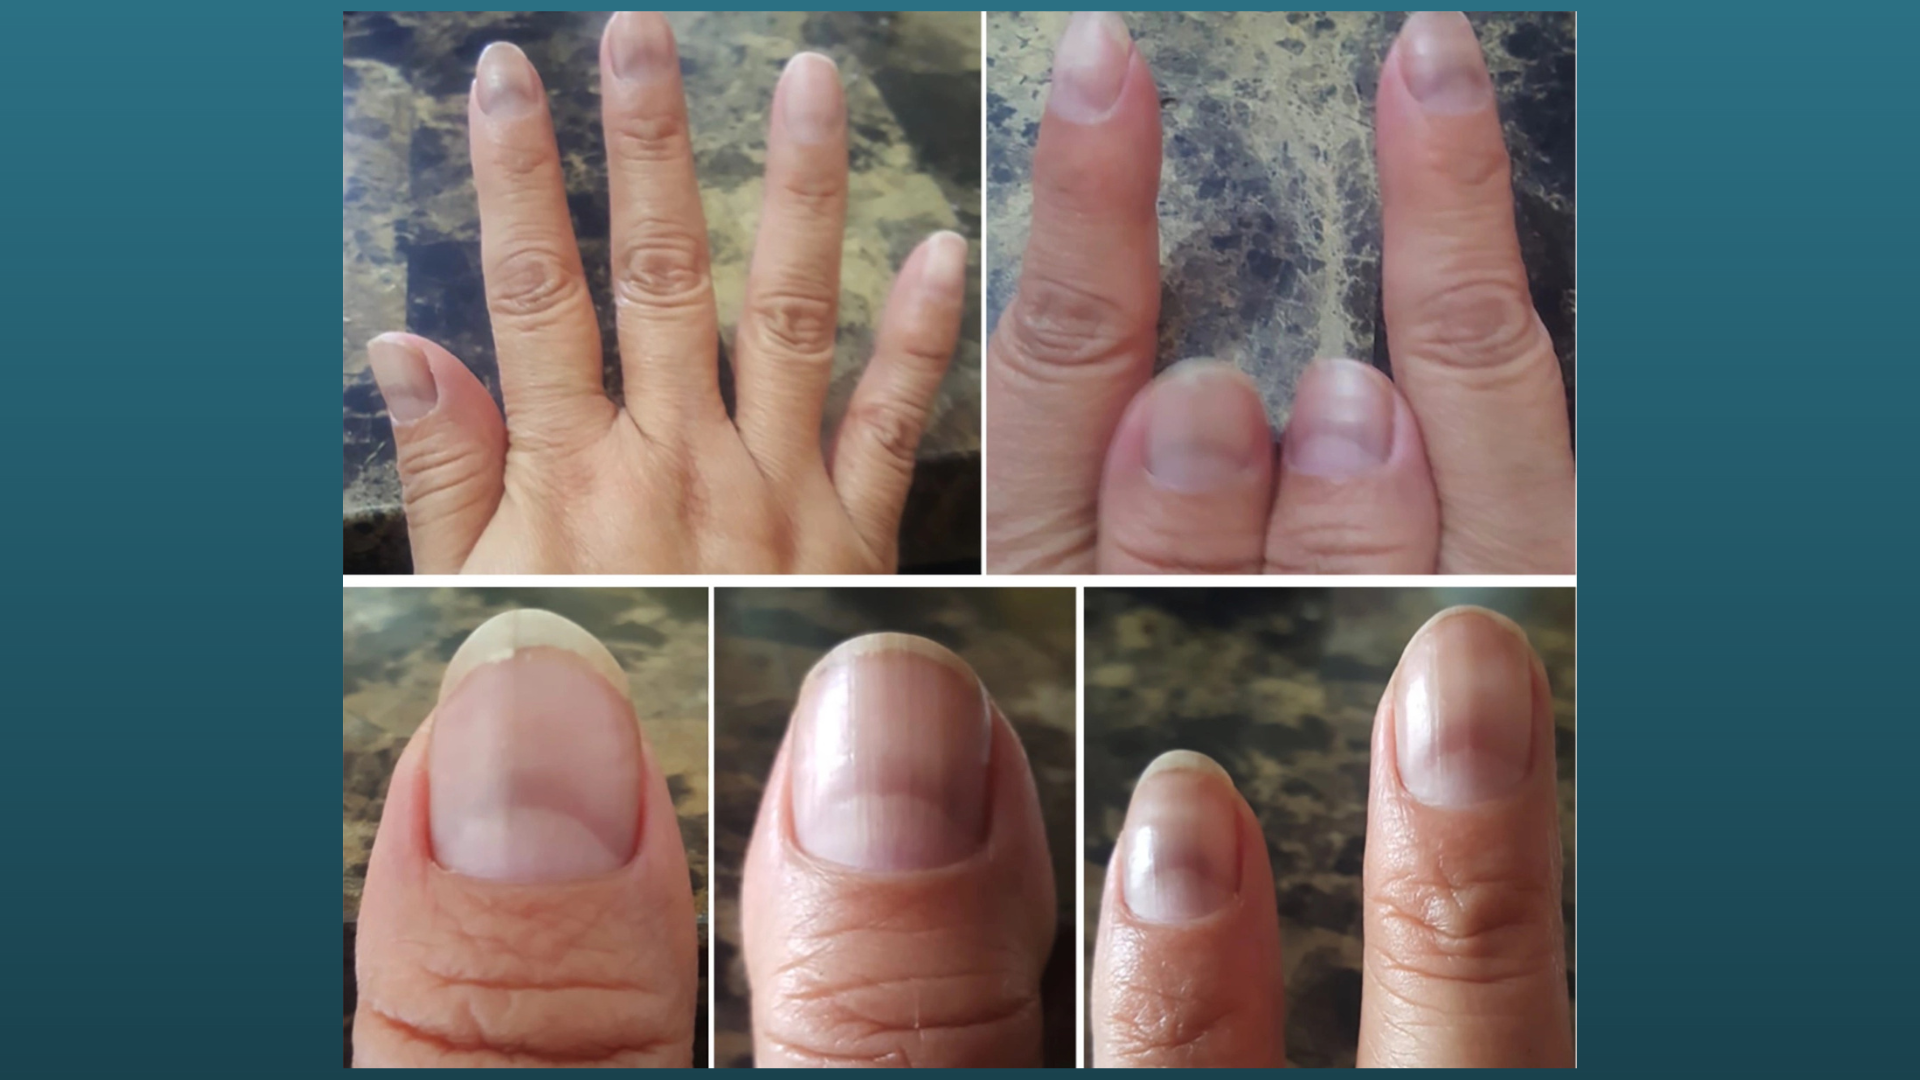 7 nail symptoms and conditions you shouldn't ignore - TODAY